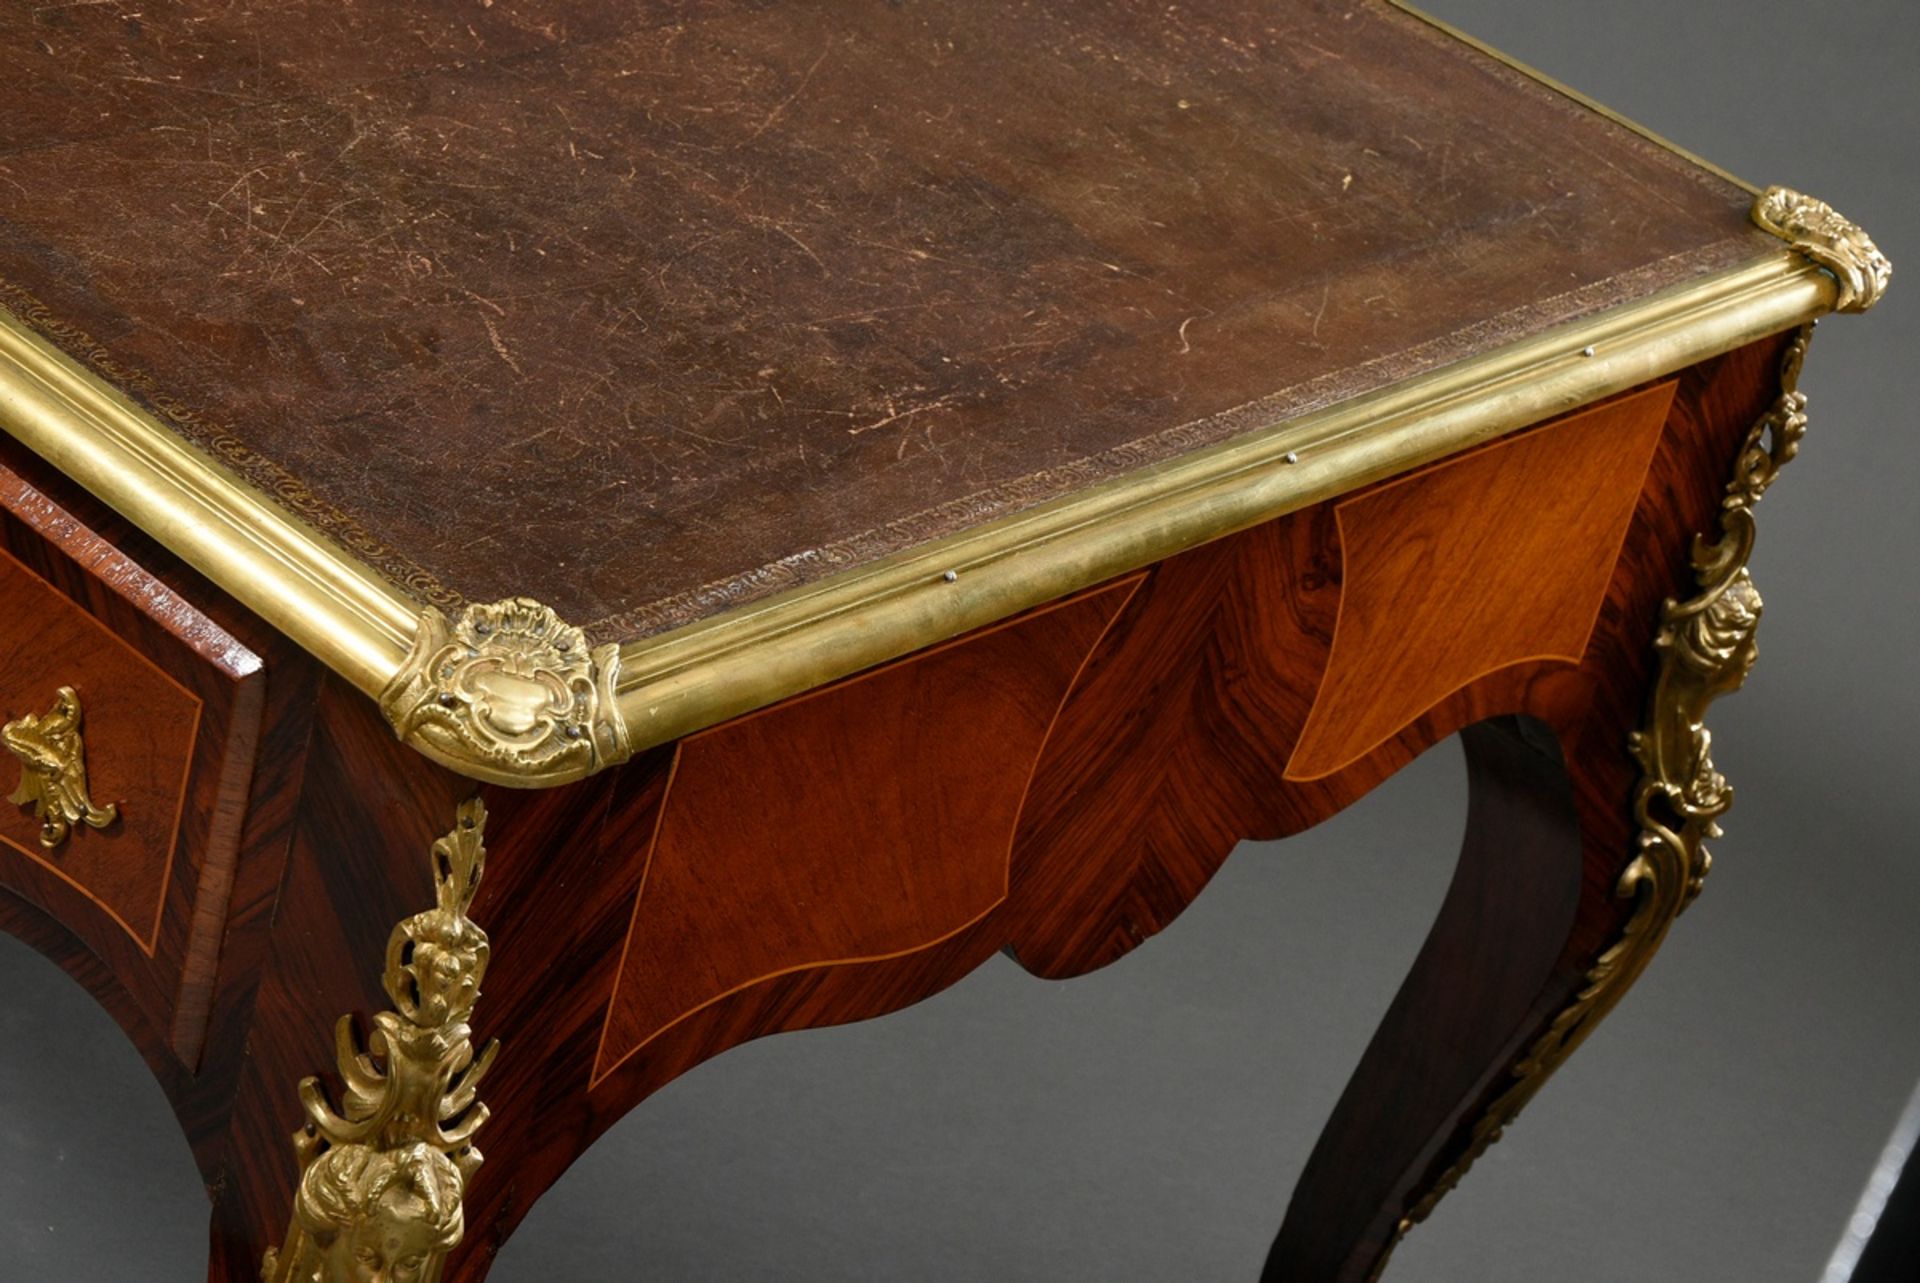 French bureau plat in Louis XV style on high curved legs with rich bronze fittings "busts of women" - Image 10 of 10